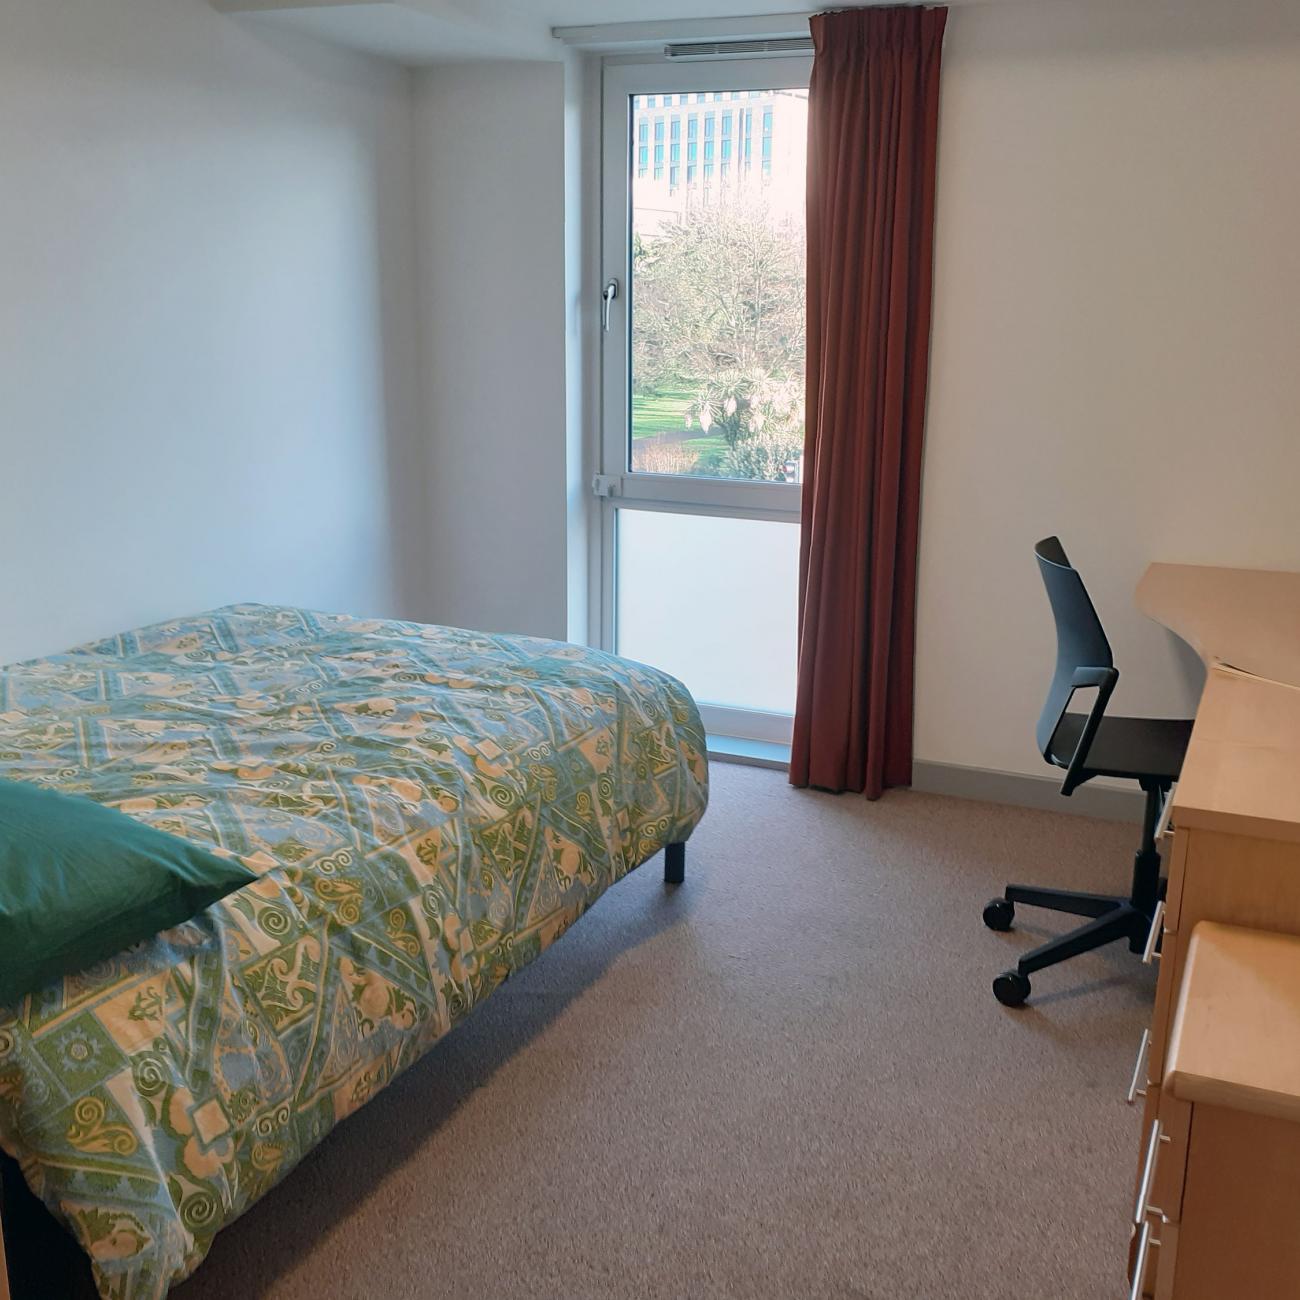 A student bedroom showing a double bed, large wooden desk and large window.